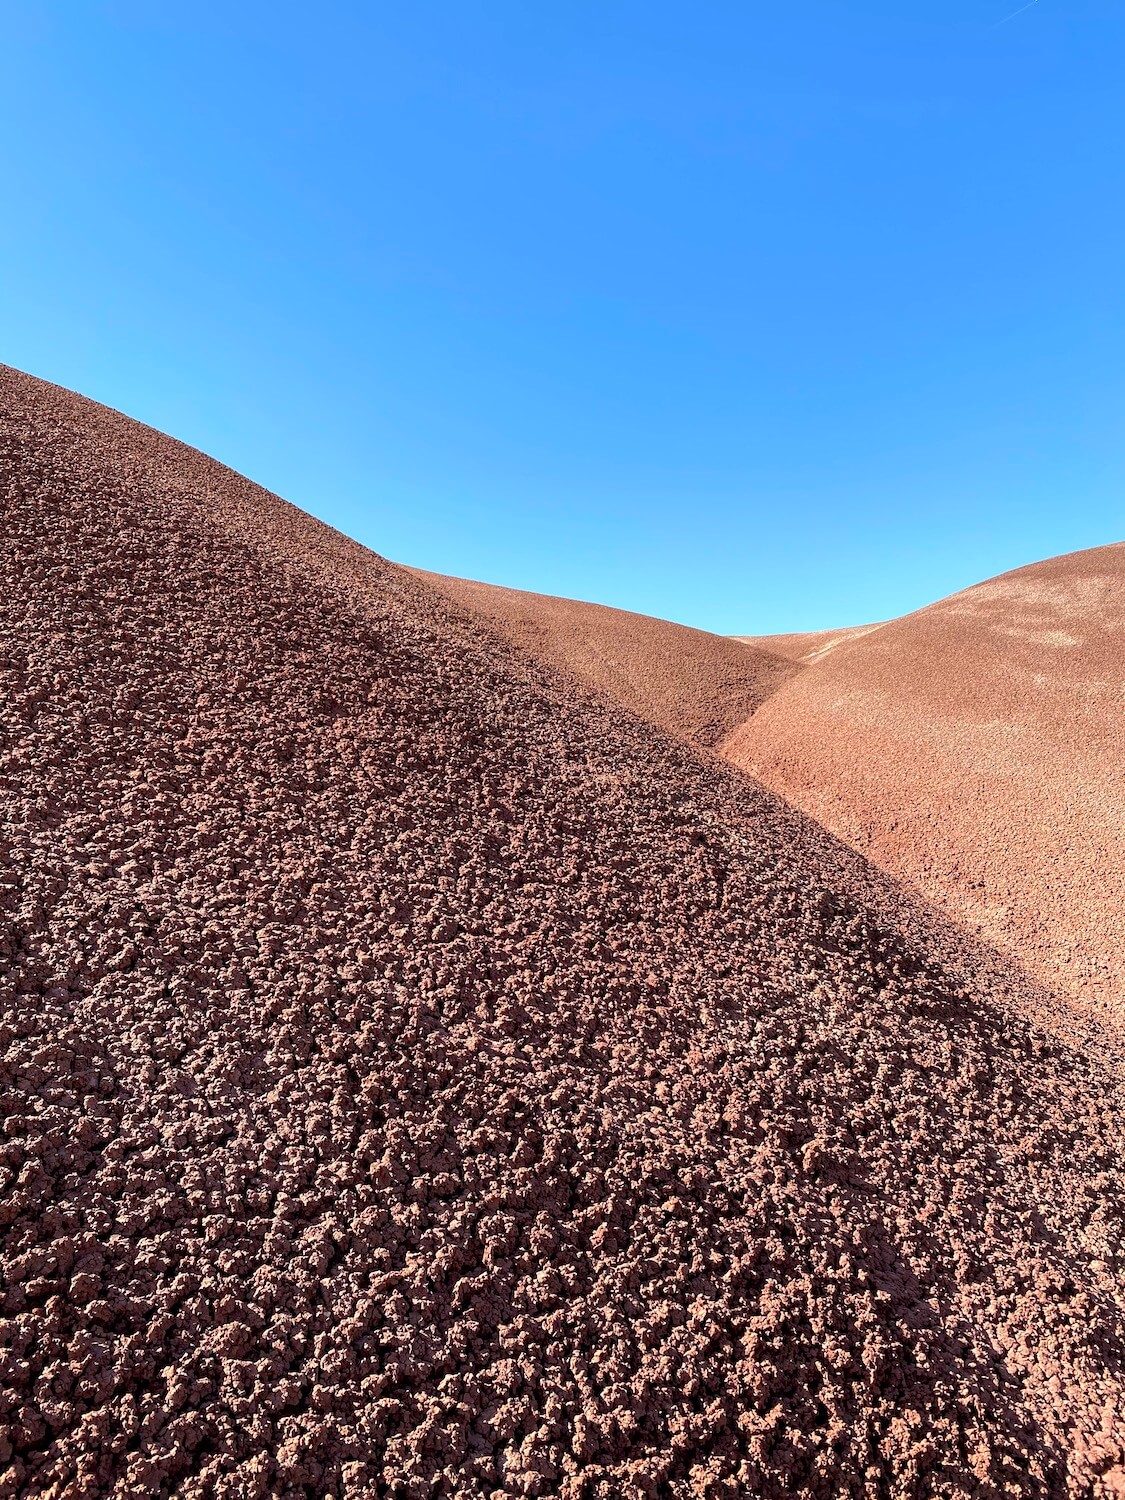 The coral like soil of the Painted Cove trail at is voluptuous with several different mounds coming together under a bright blue sky.  This photo taken at the painted hills in Oregon also shows the intricate red matter that once was ash falling from nearby volcanoes. 